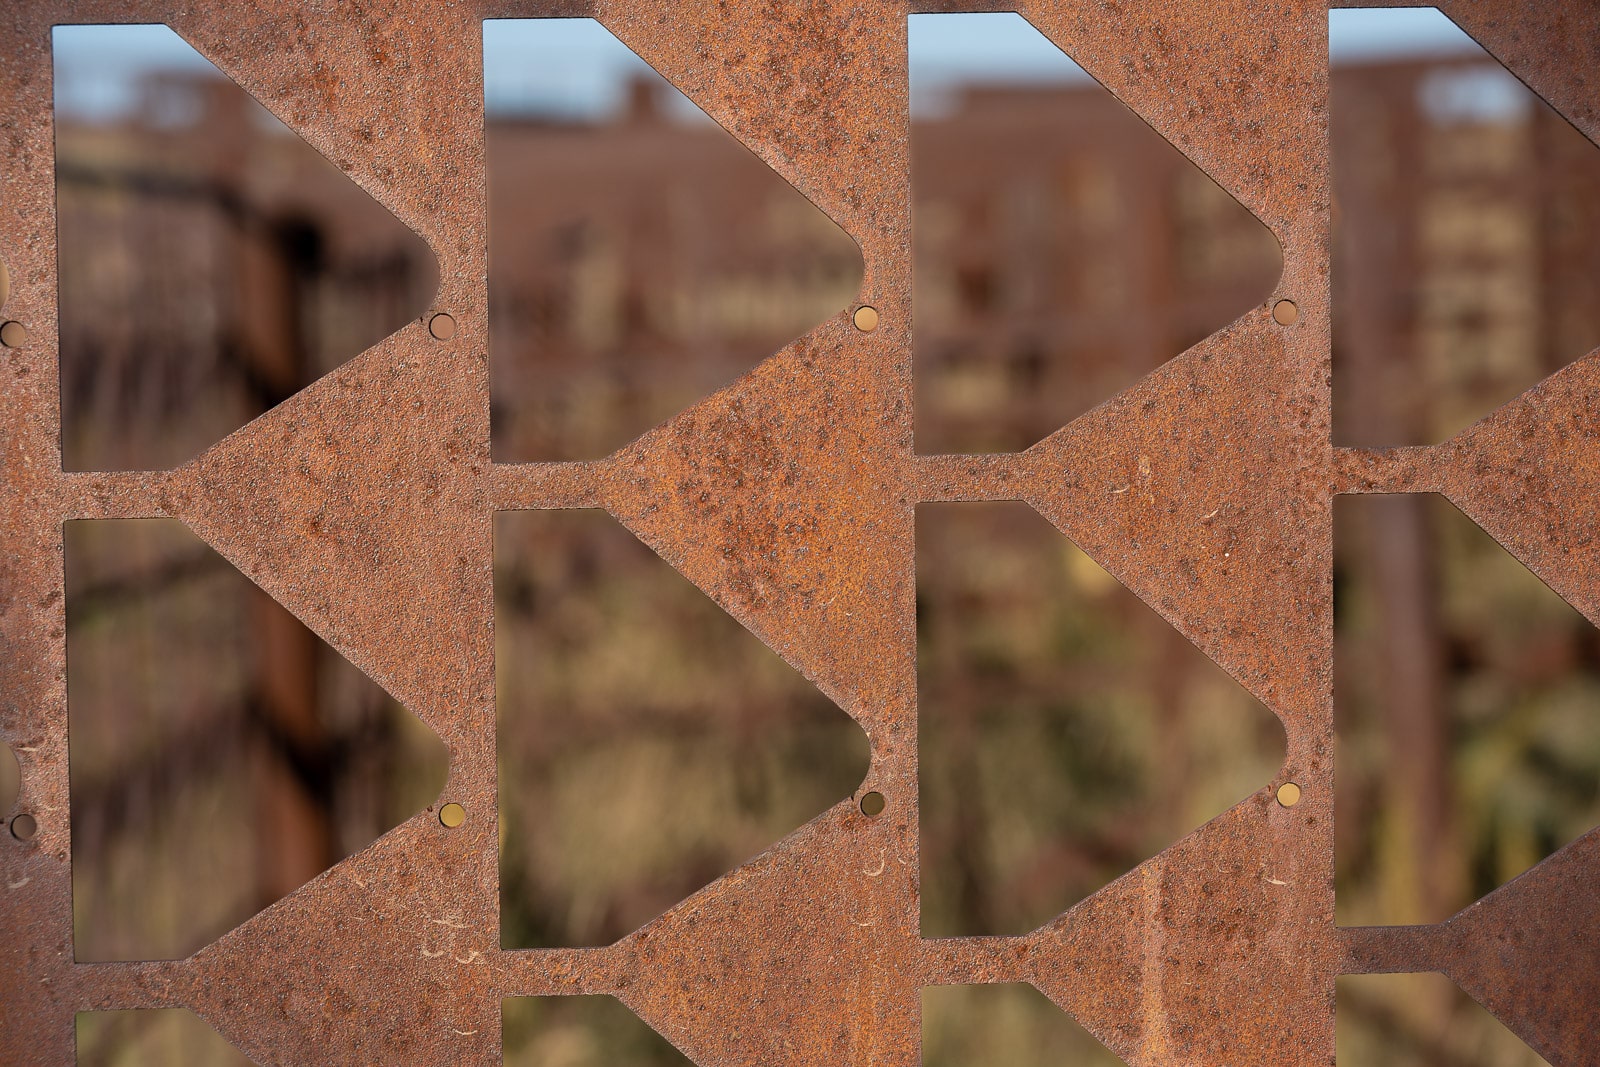 This is a closeup of part of a maze constructed of sections of iron fence. It is adjacent to Grasshoppers in the Field, along the Enchanted Highway between I-94 and Regent, North Dakota.